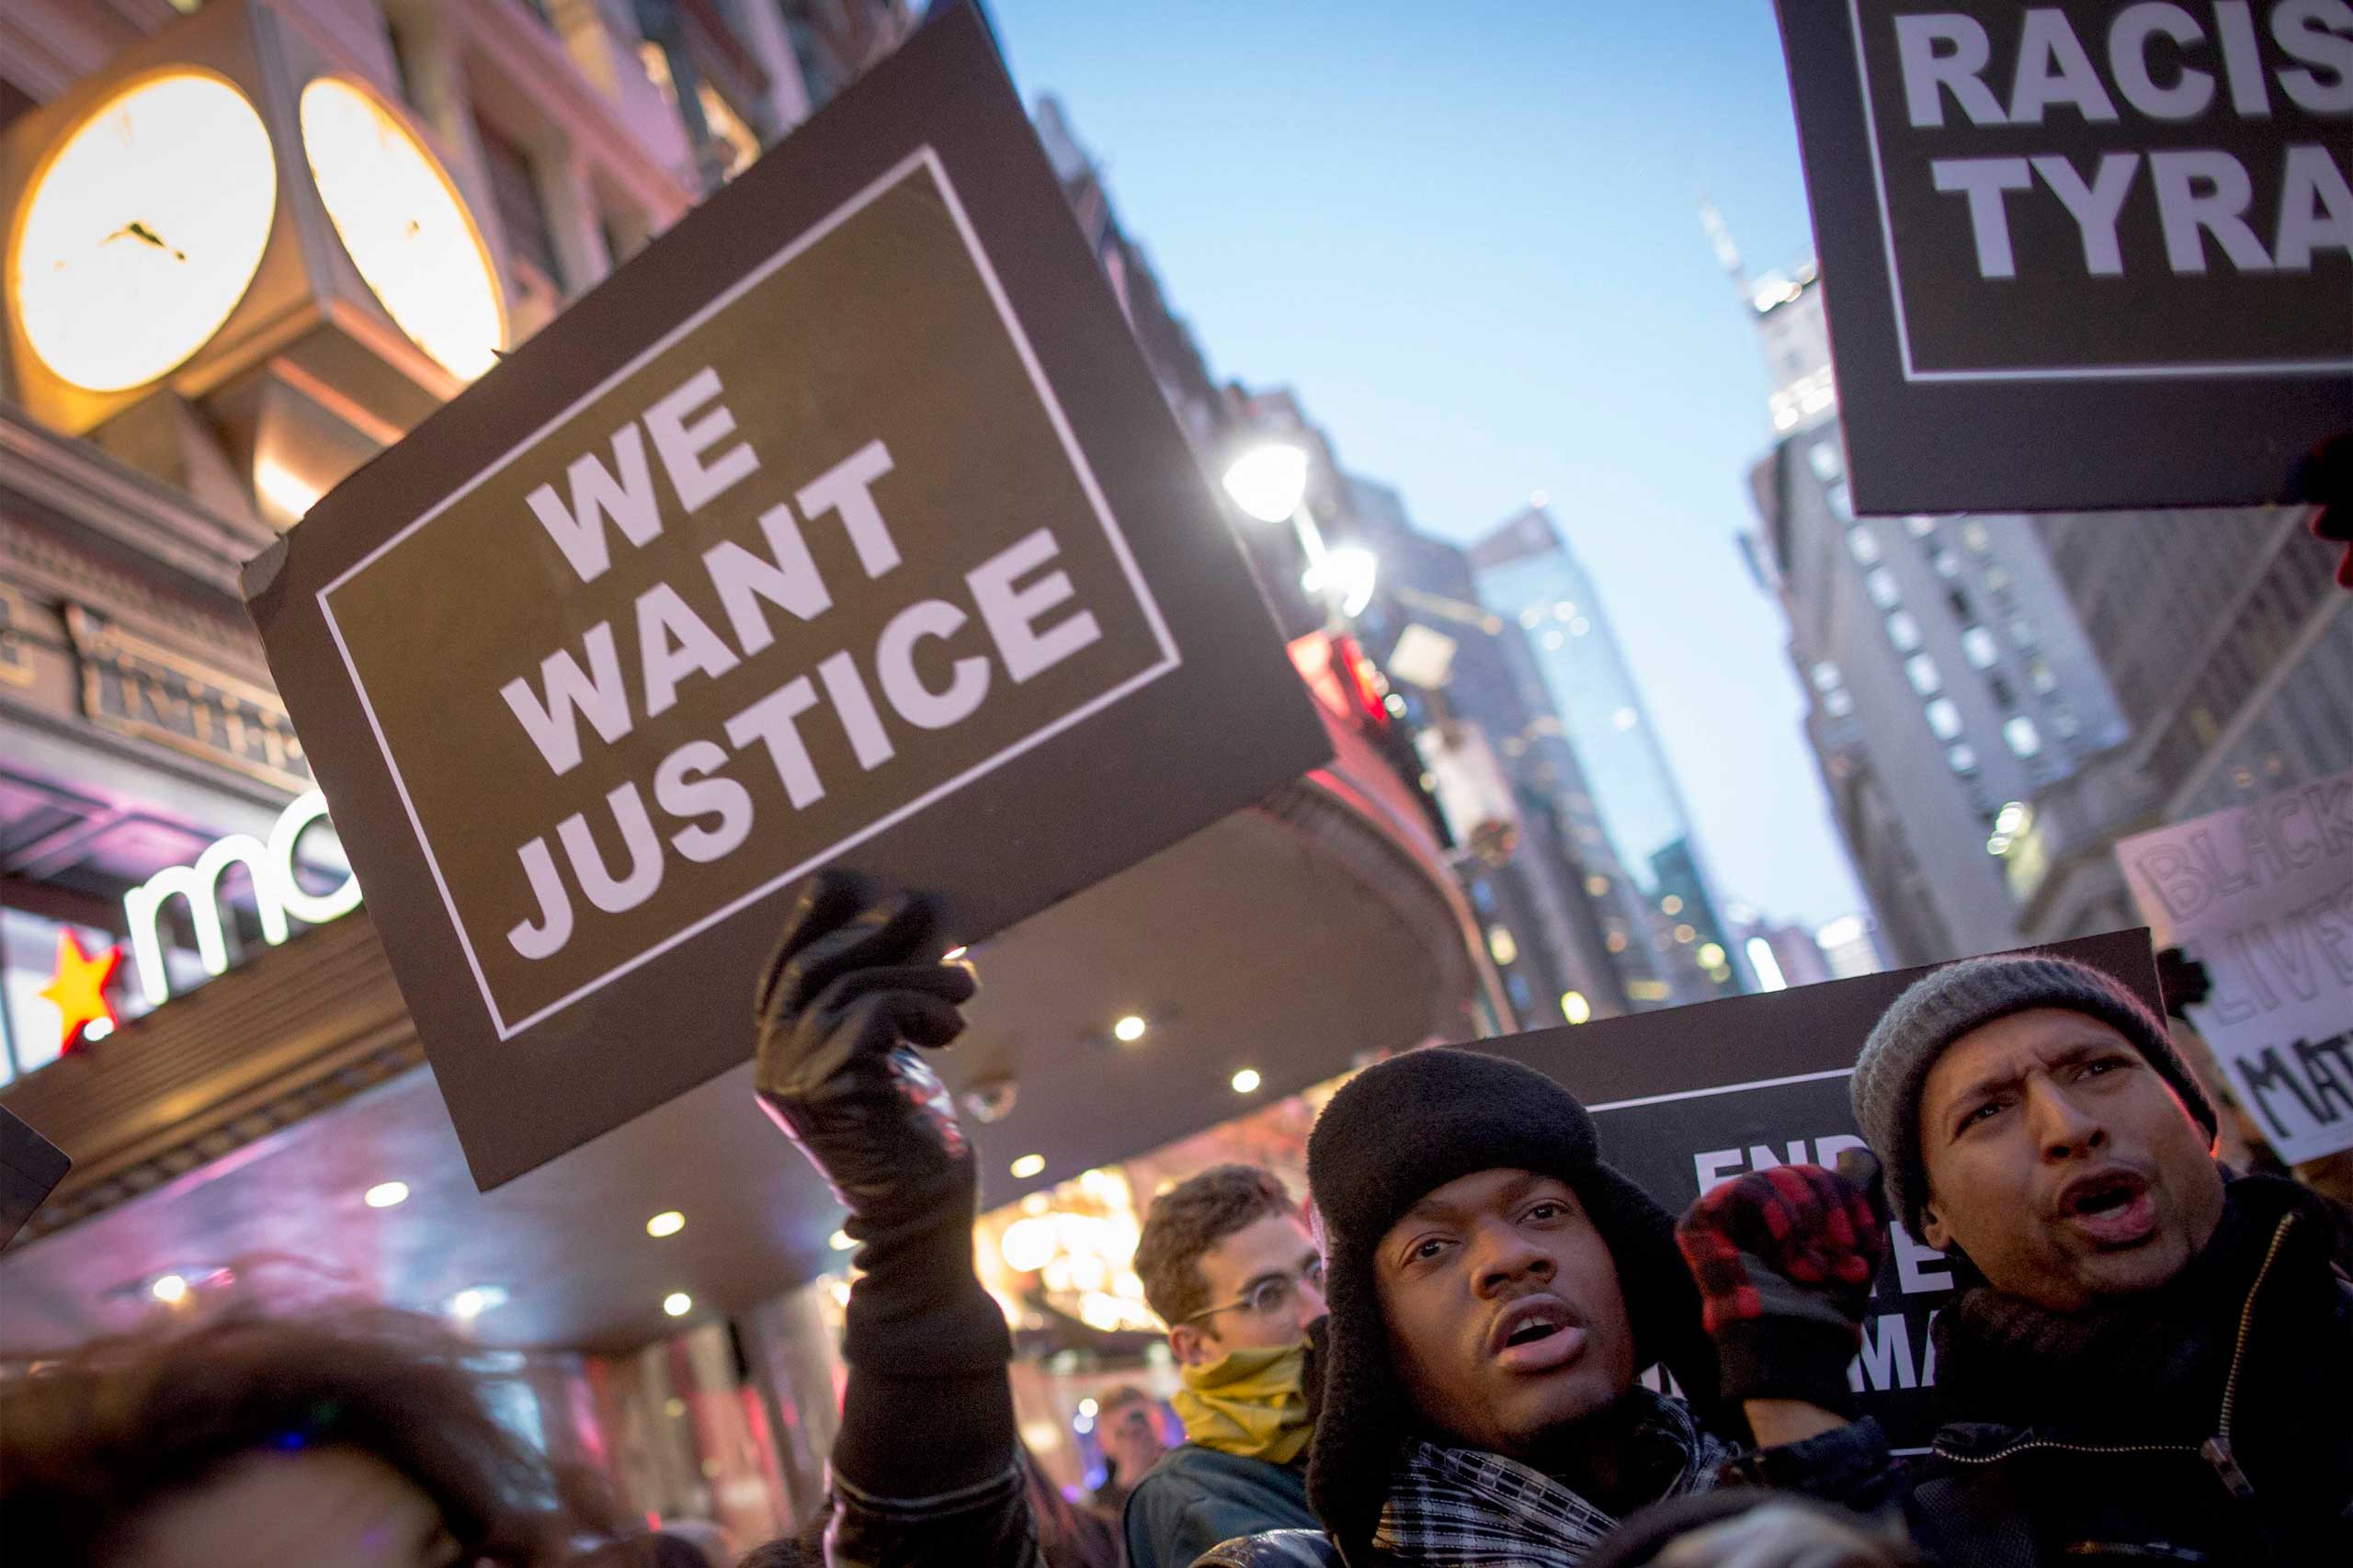 A protester holds up a sign while demonstrating against the grand jury decision in the case against Darren Wilson in Ferguson, outside of Macy's in New York City on Nov. 28, 2014. (Brendan McDermid—Reuters)